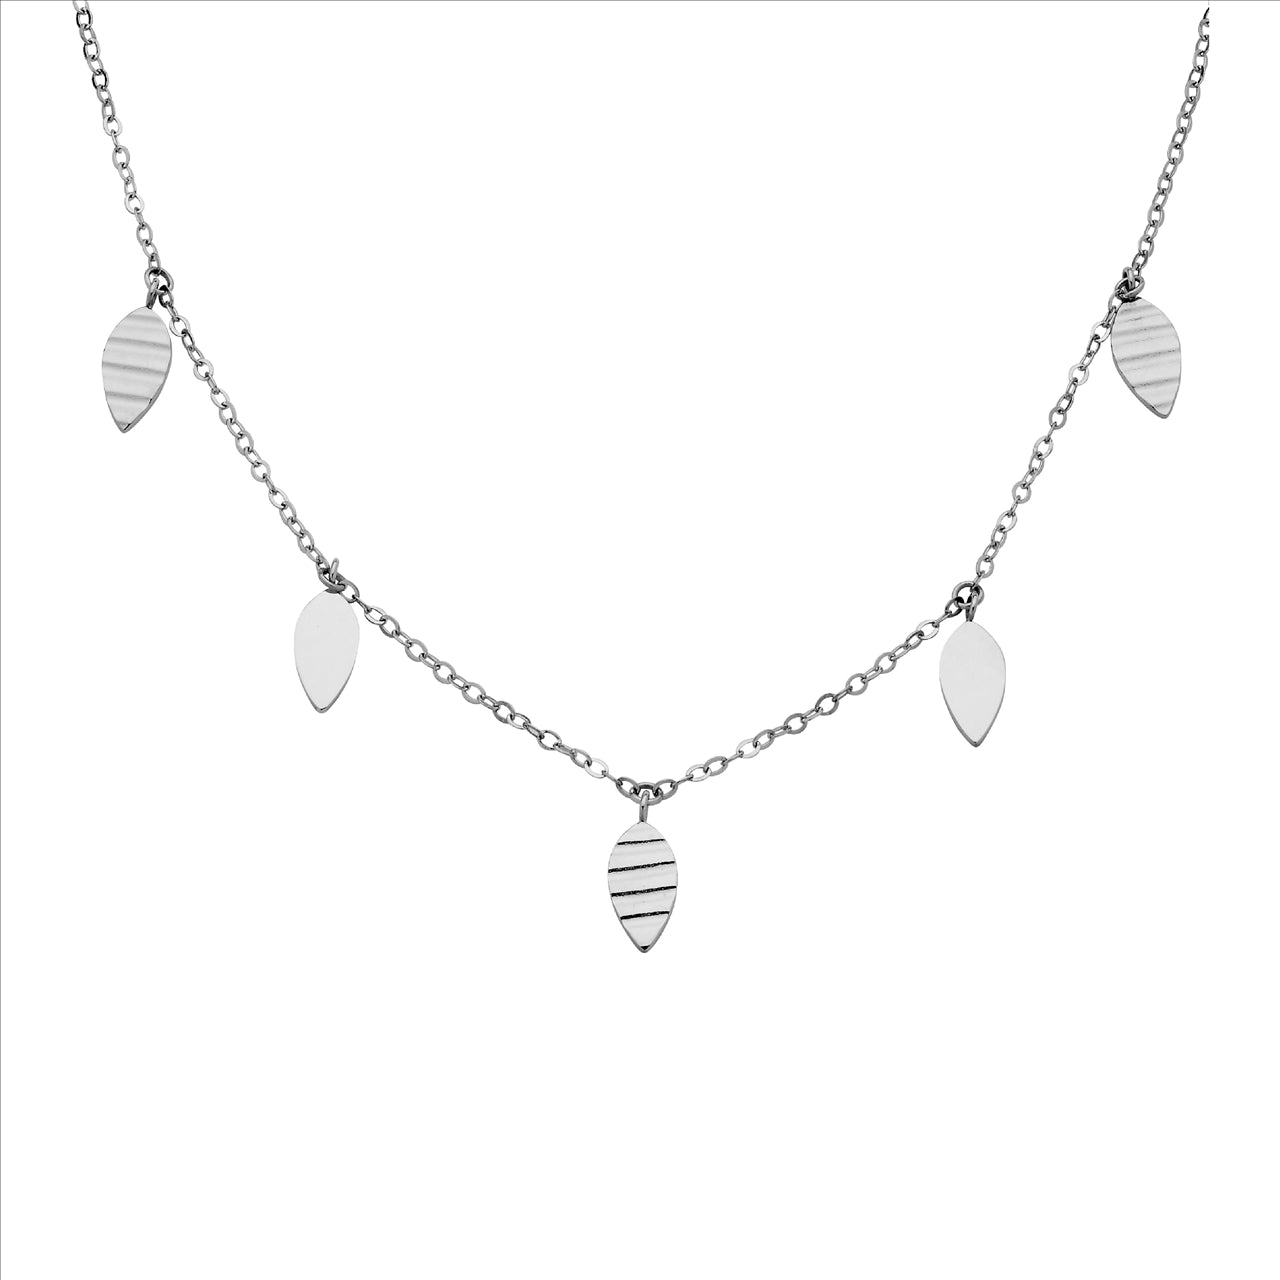 Stainless steel necklace 40+5cm, leaf feature